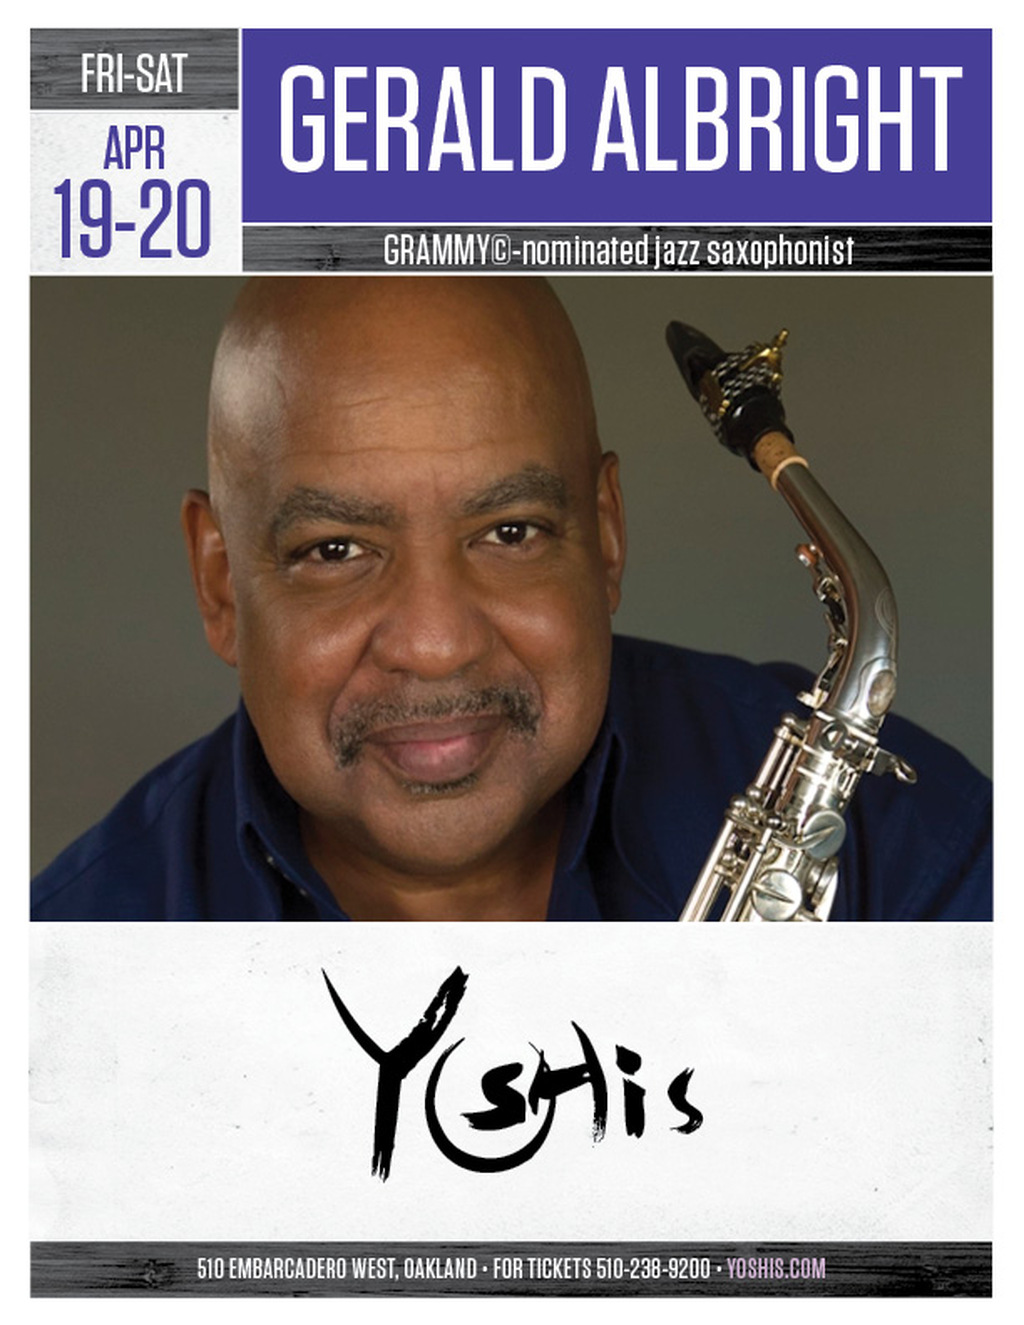 Yoshi s Saxophonist  19 20 GRAMMY  nominated jazz musician to perform at Yoshi s in Oakland promotion flier on Digifli com